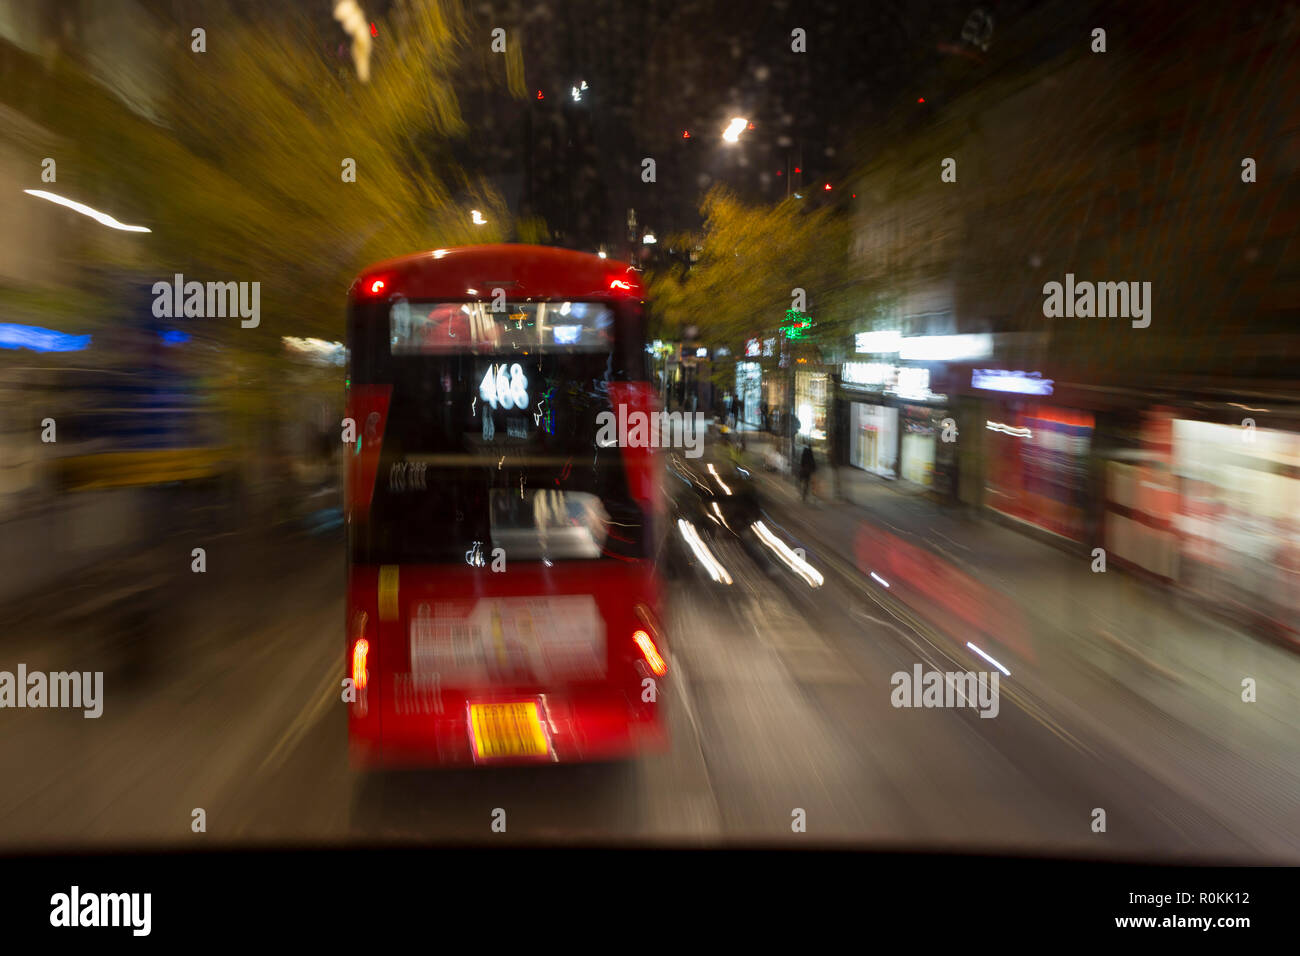 A blurred bus journey along the Walworth Road, on 6th November 2018, in London, England. Stock Photo